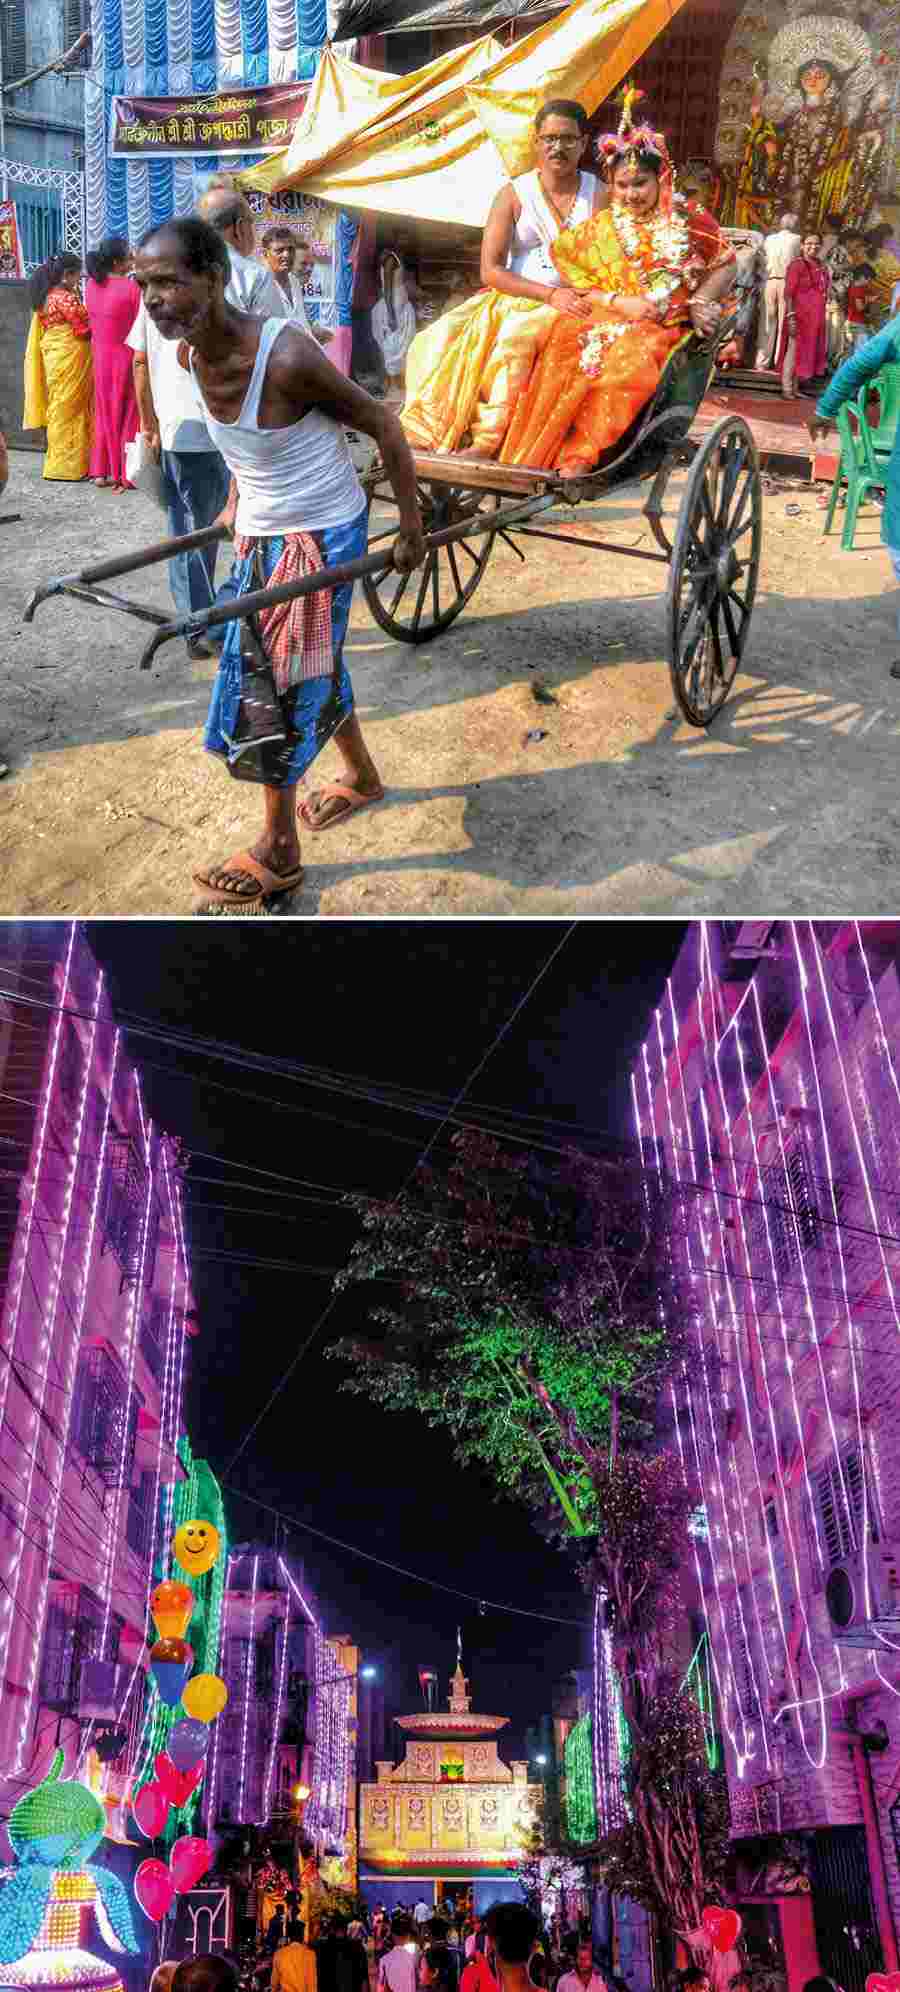 (Top) A young girl is ferried to the Ahiritola Sarbojanin Jagaddhatri Puja pandal for Kumari puja on Tuesday and (bottom) the Baghbazar Sather Palli Club puja pandal captures vibrant celebrations surrounding the theme of Mohun Bagan football club